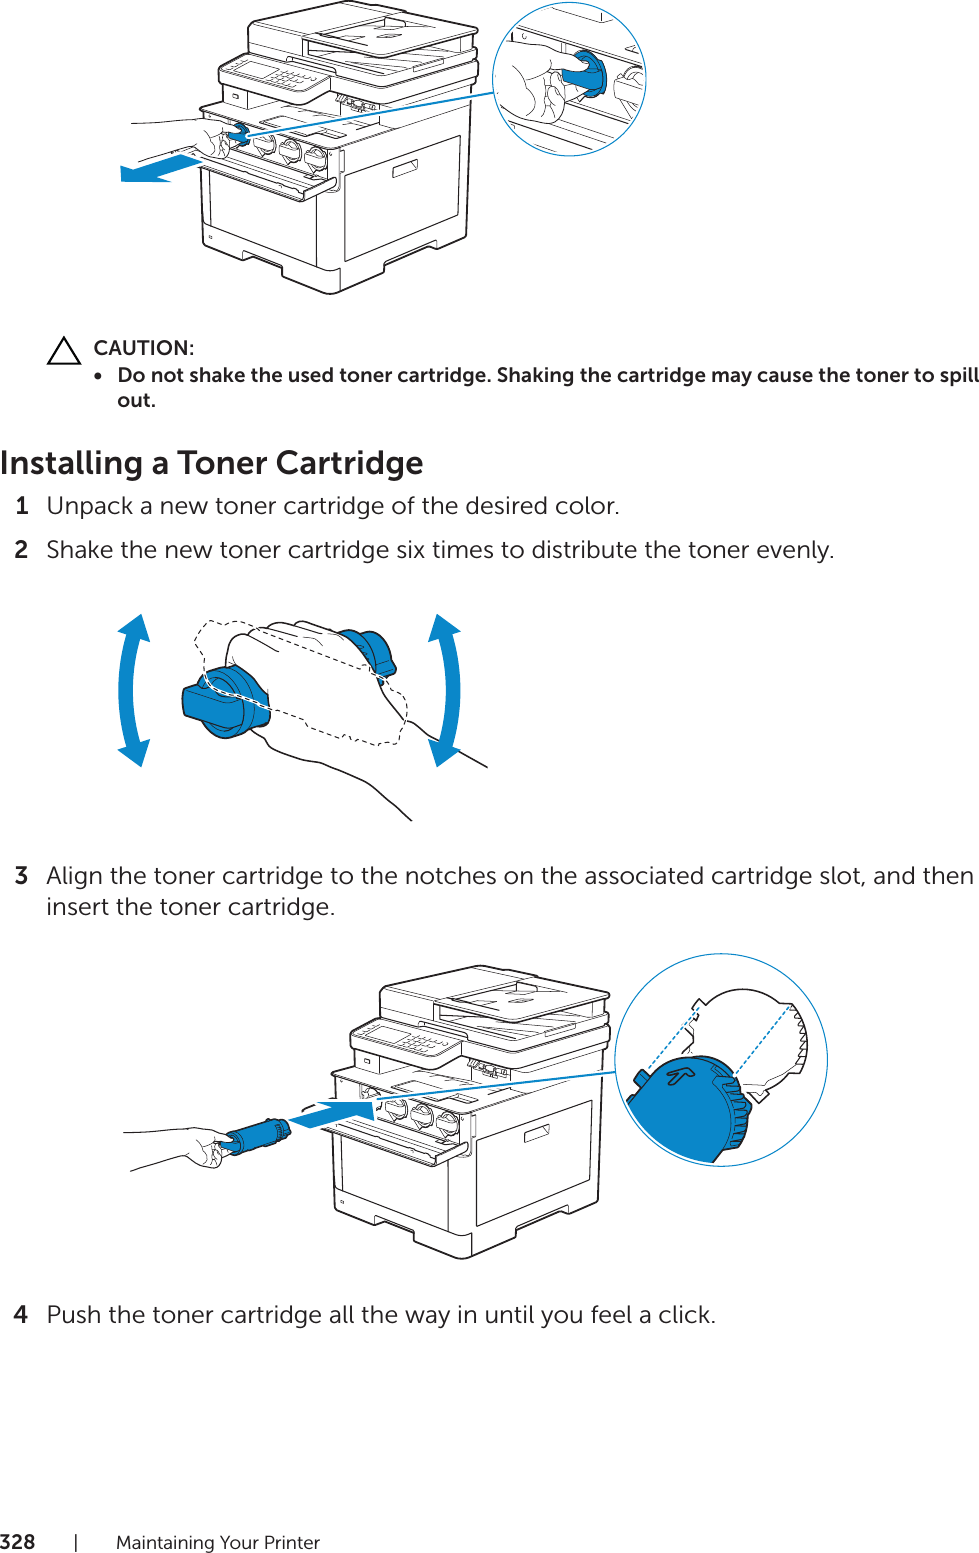 328| Maintaining Your PrinterCAUTION:• Do not shake the used toner cartridge. Shaking the cartridge may cause the toner to spill out.Installing a Toner Cartridge1Unpack a new toner cartridge of the desired color.2Shake the new toner cartridge six times to distribute the toner evenly.3Align the toner cartridge to the notches on the associated cartridge slot, and then insert the toner cartridge.4Push the toner cartridge all the way in until you feel a click.